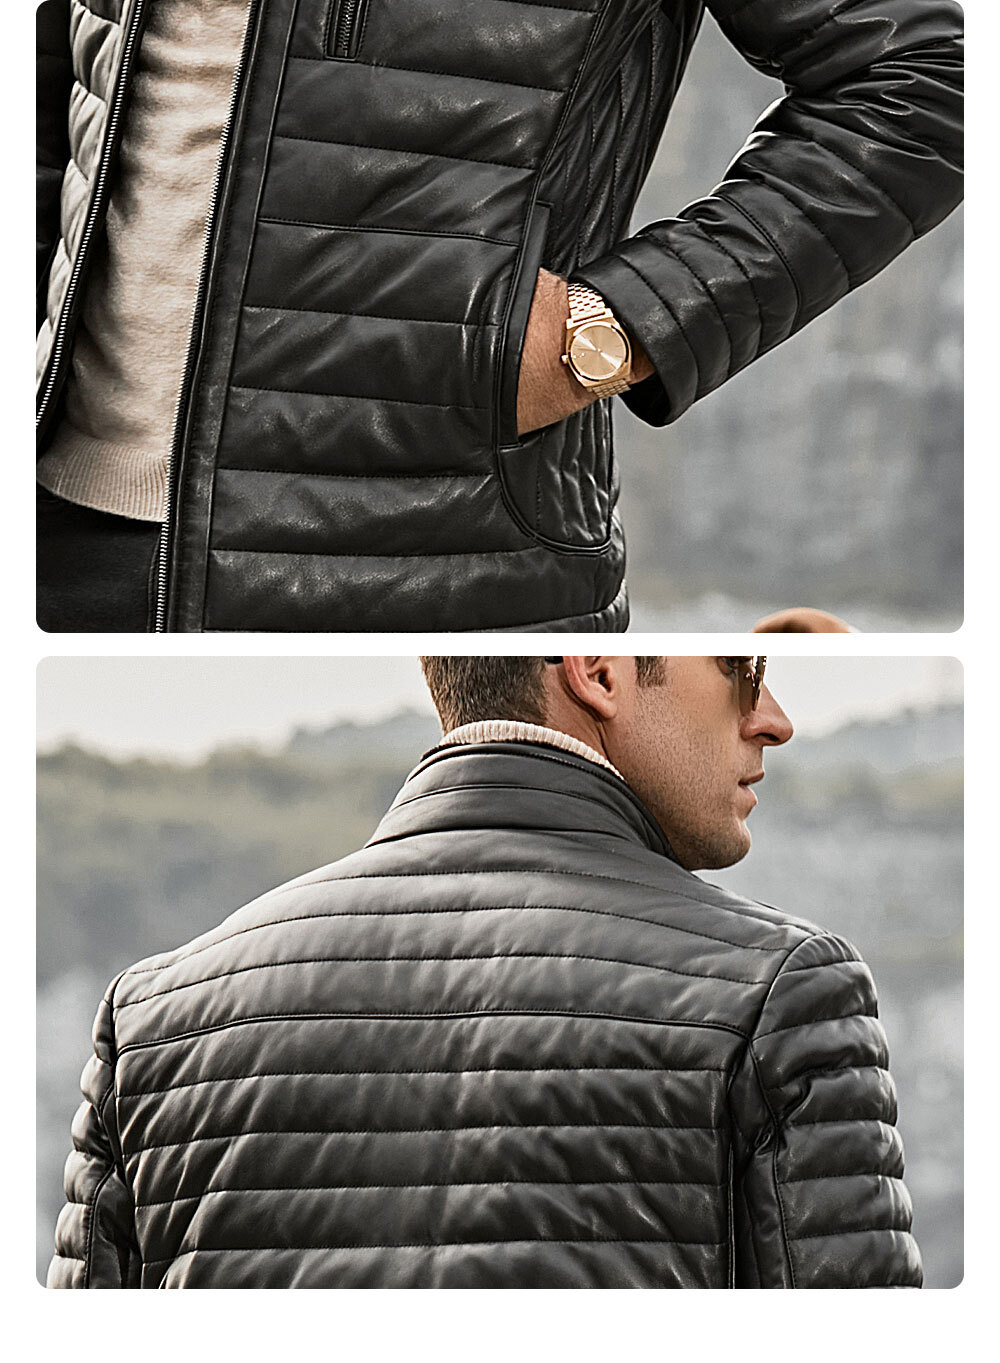 Men's Leather Puffer Jacket with Fur collar 196 Buy lambskin removable fur collar down jacket| buy stand collar flavor leather motorcycle jacket